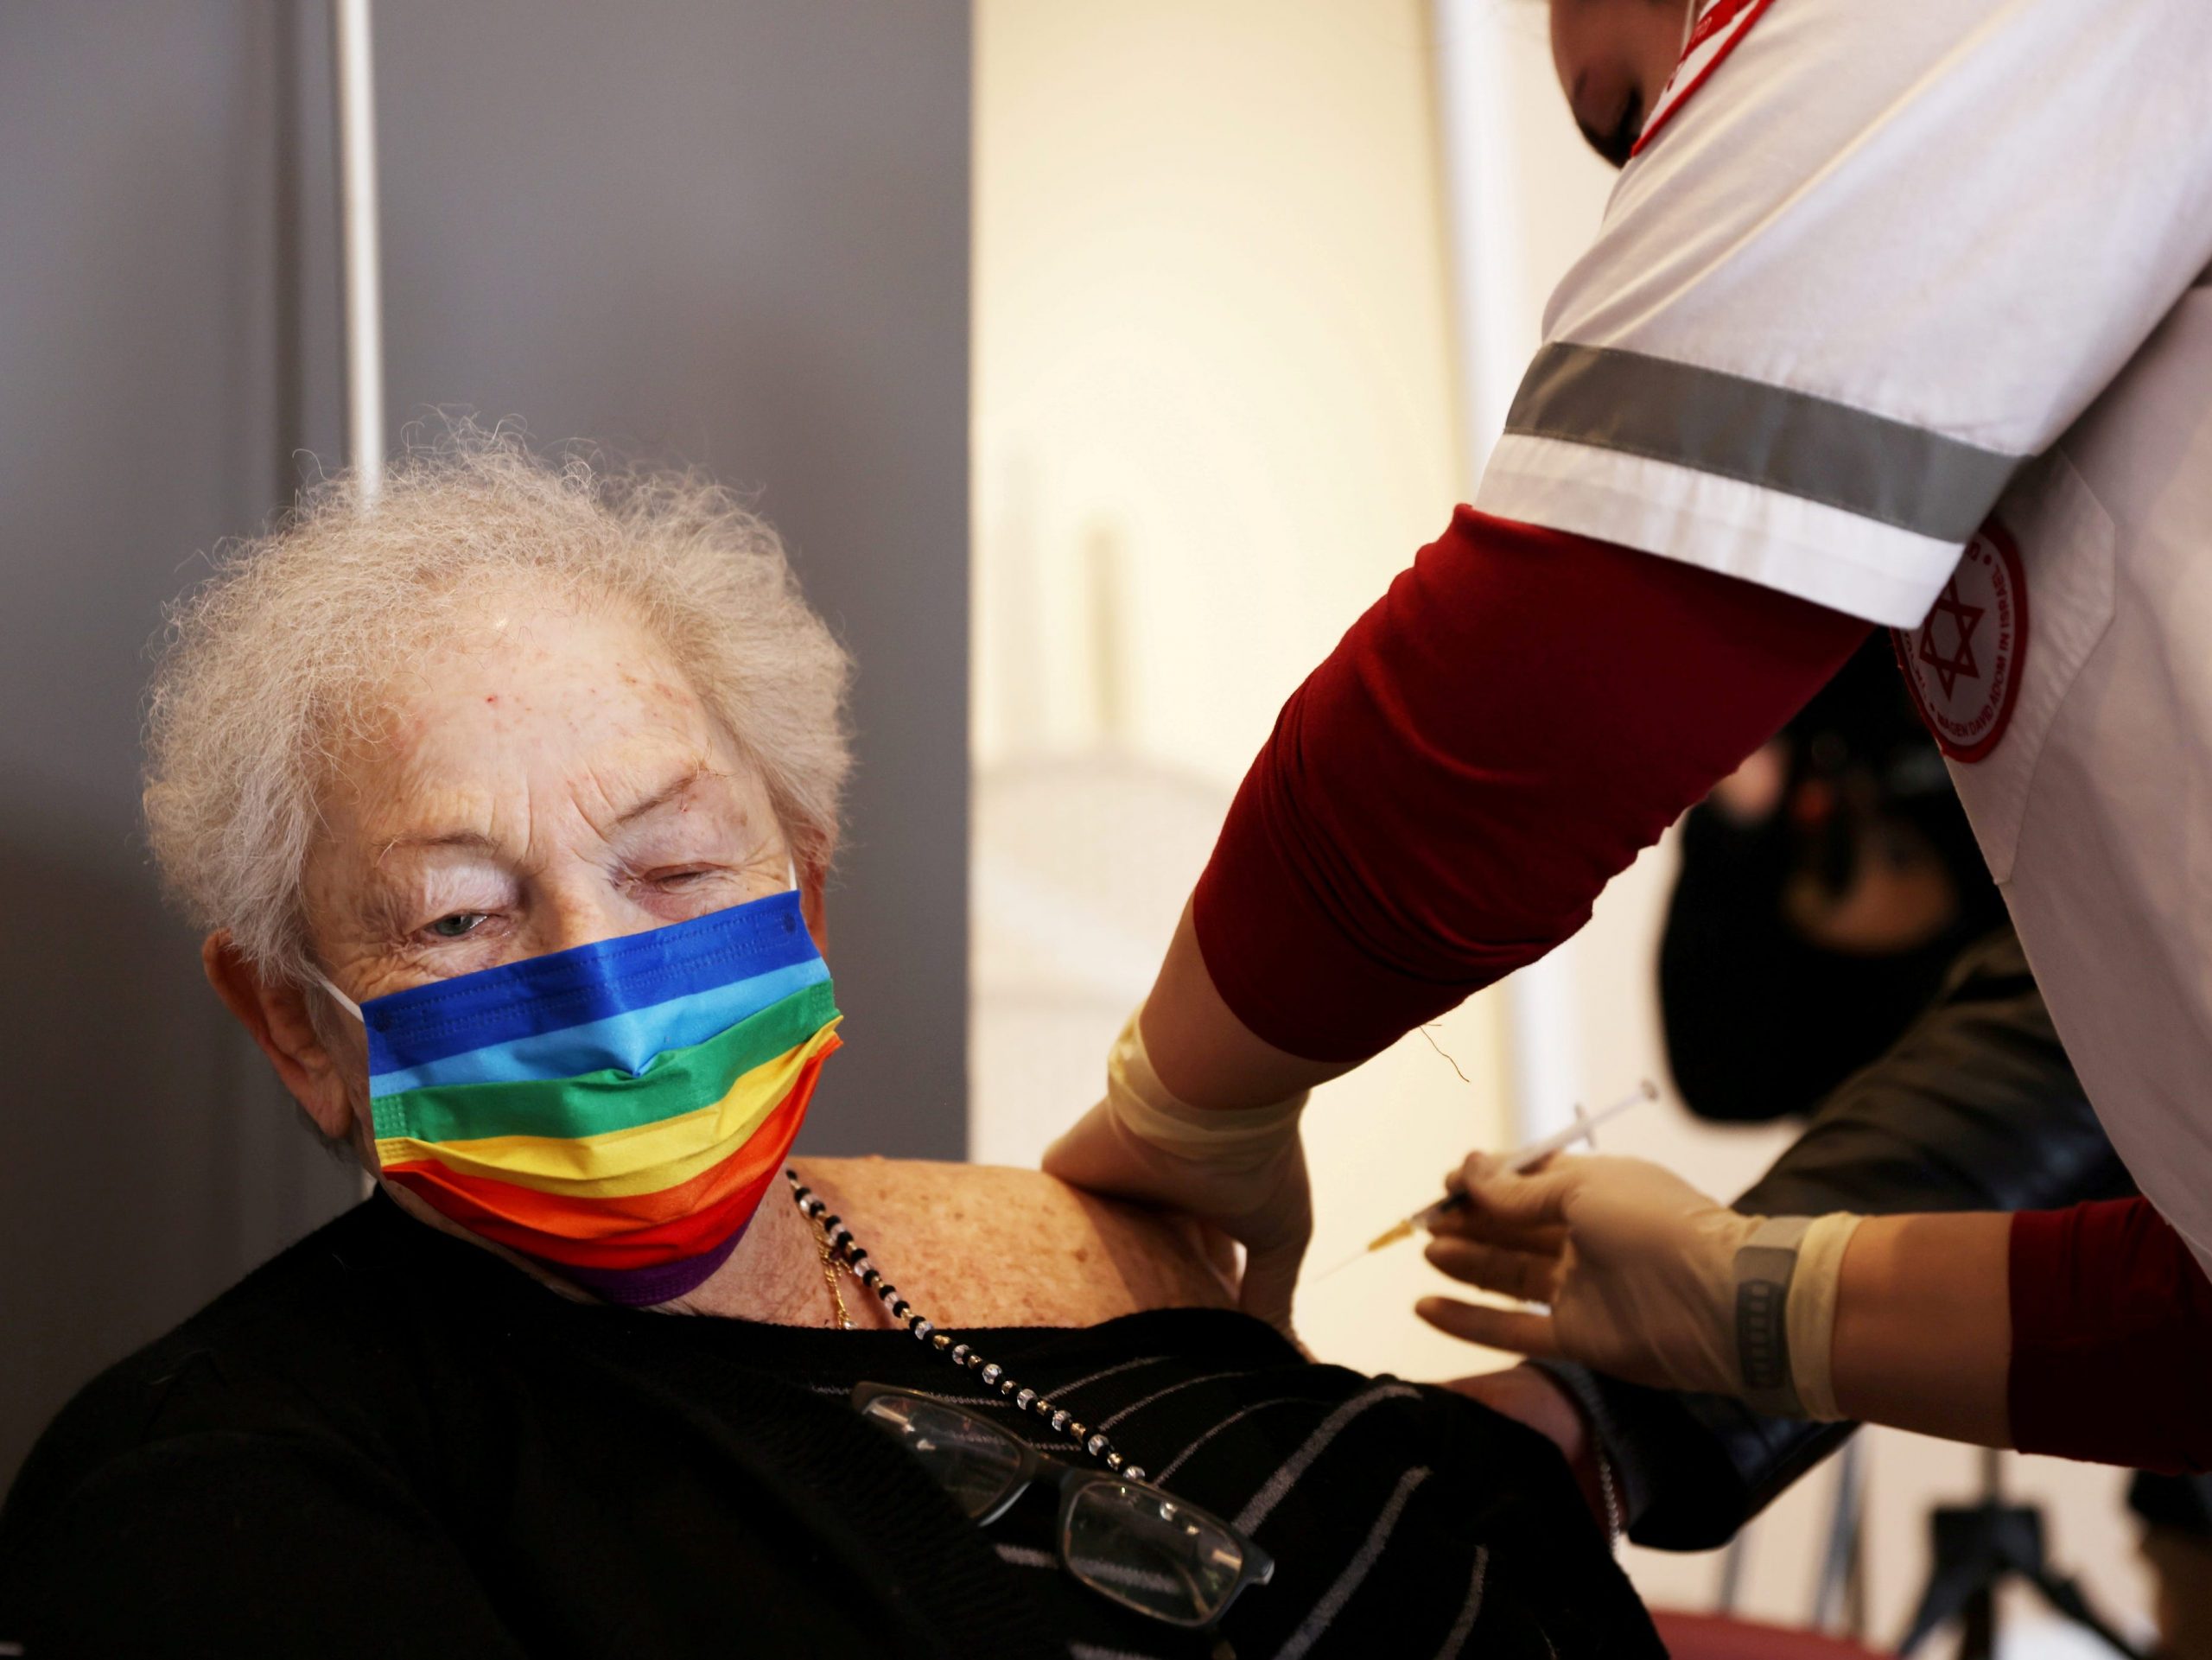 An elderly woman receives a booster shot of her vaccination against the coronavirus disease (COVID-19) at an assisted living facility, in Netanya, Israel, January 19, 2021.